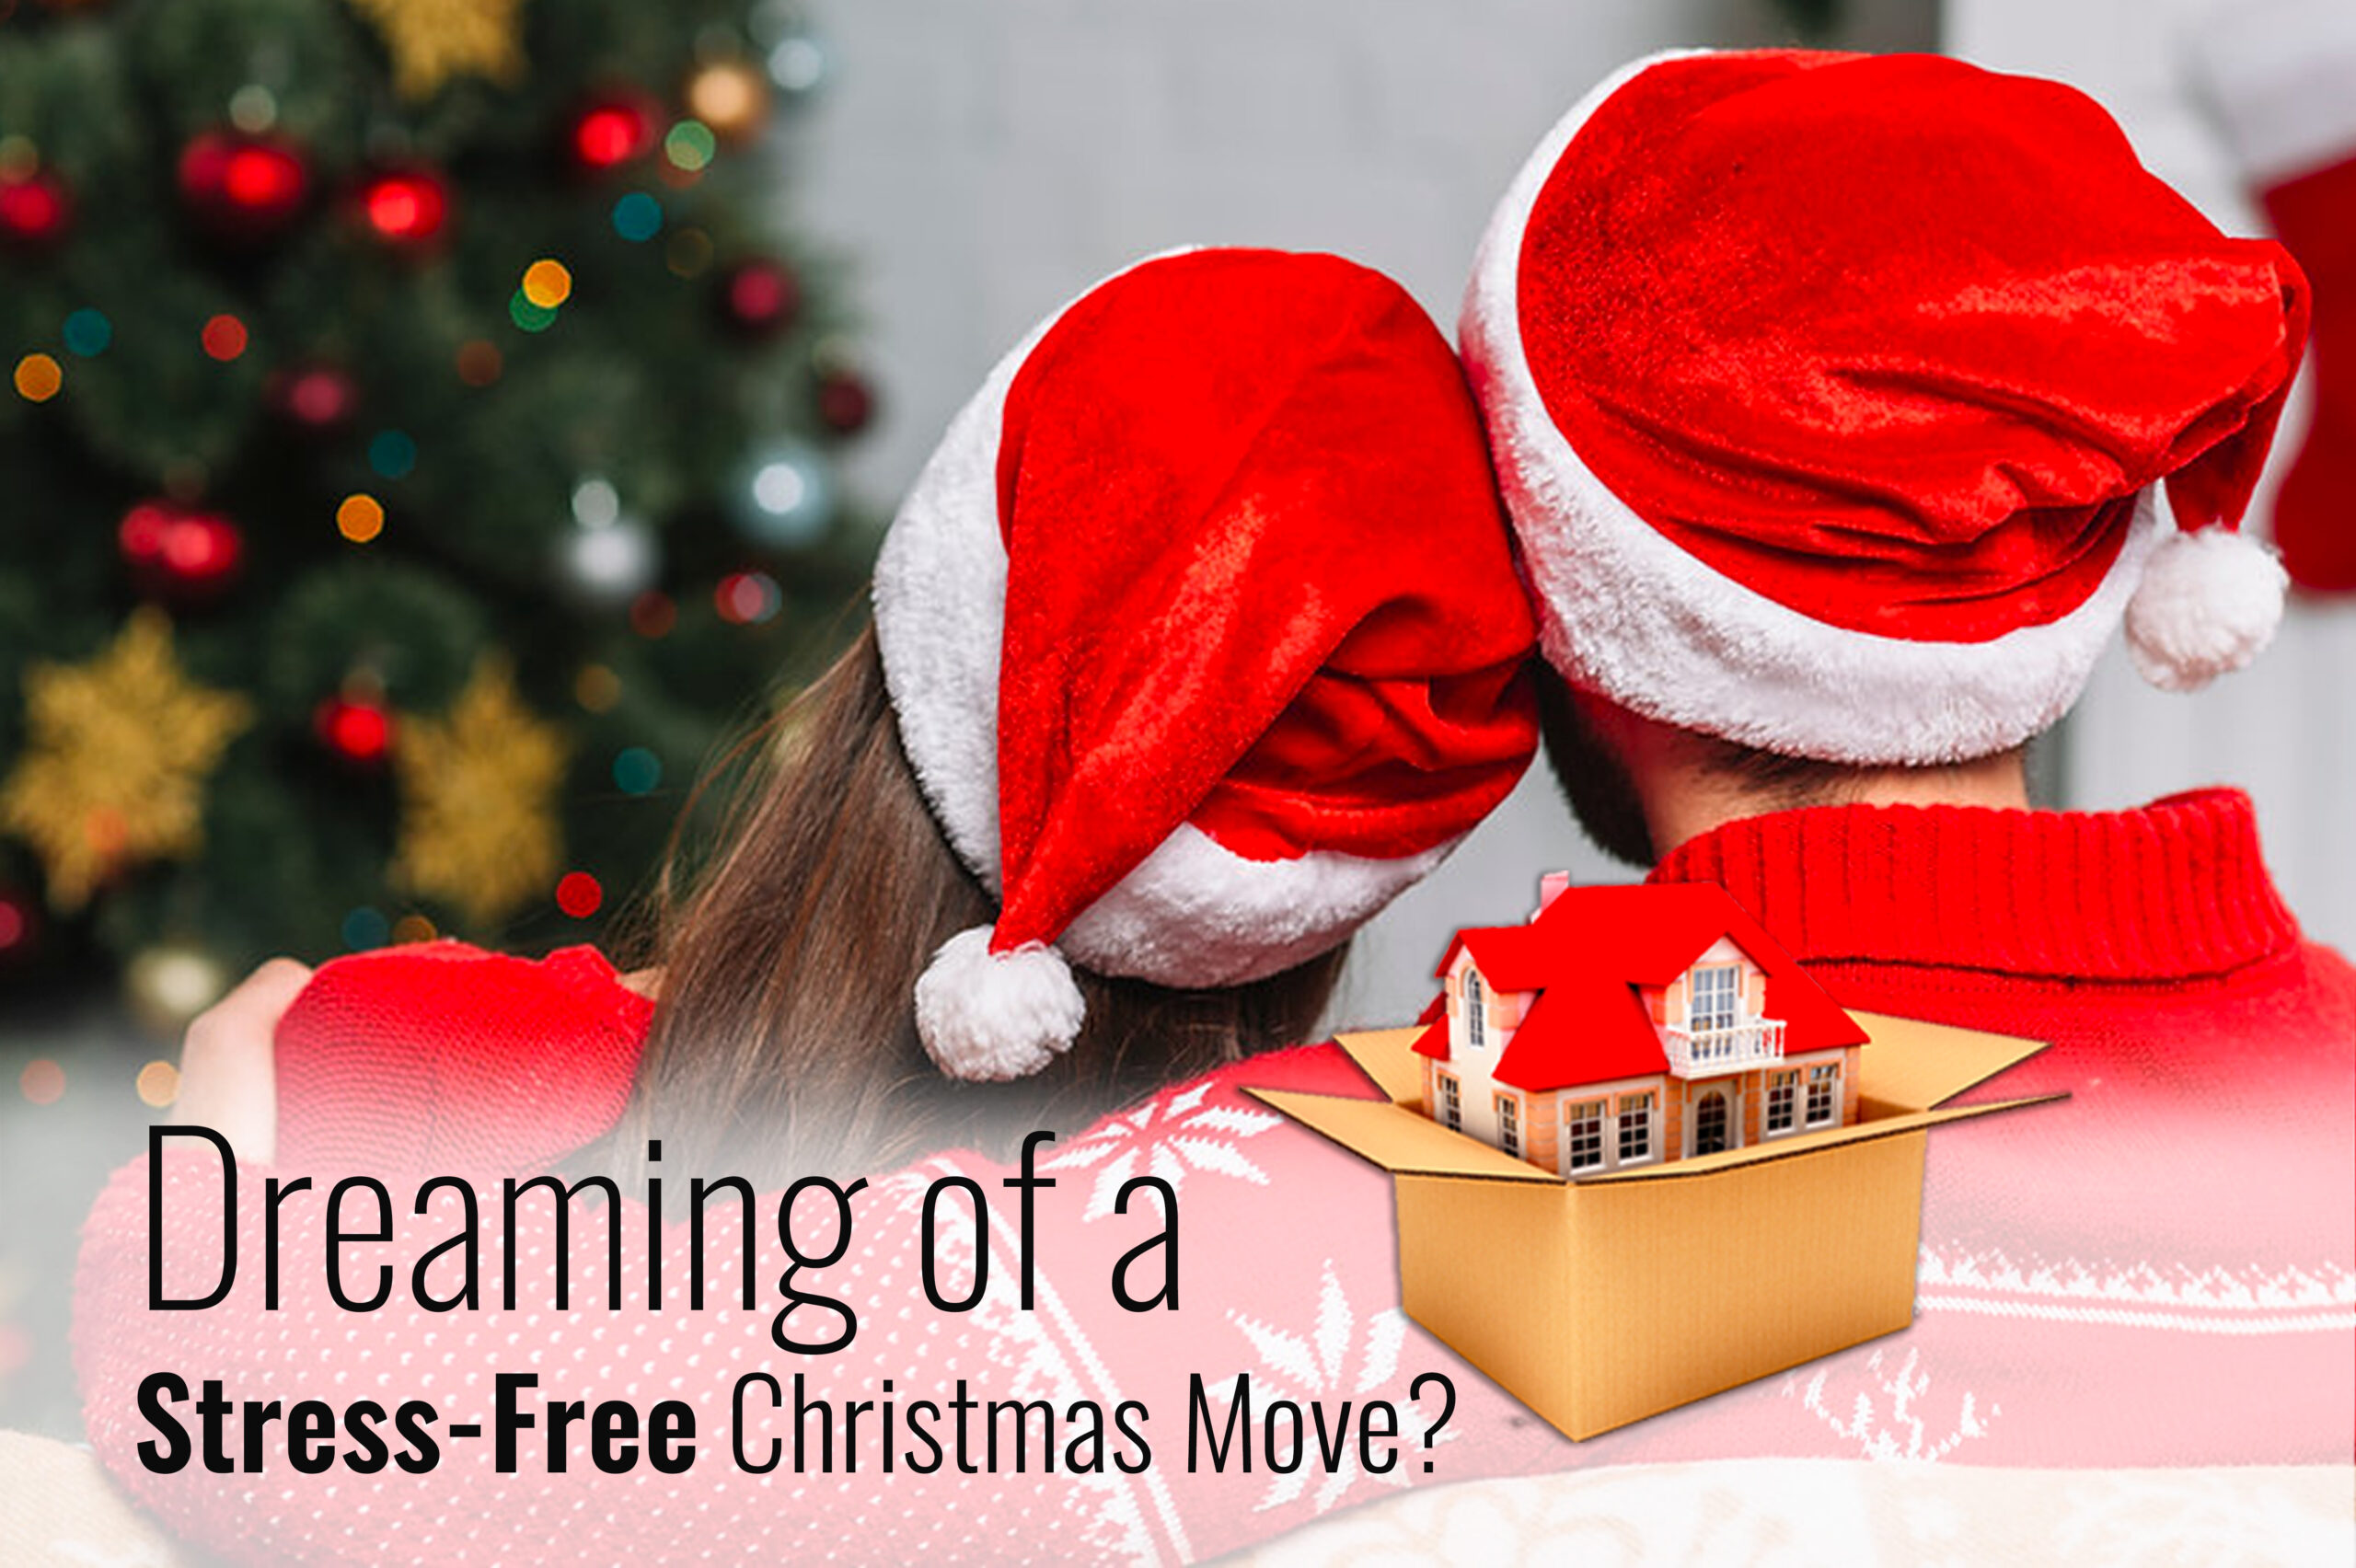 Dreaming of a Stress-Free Christmas Move